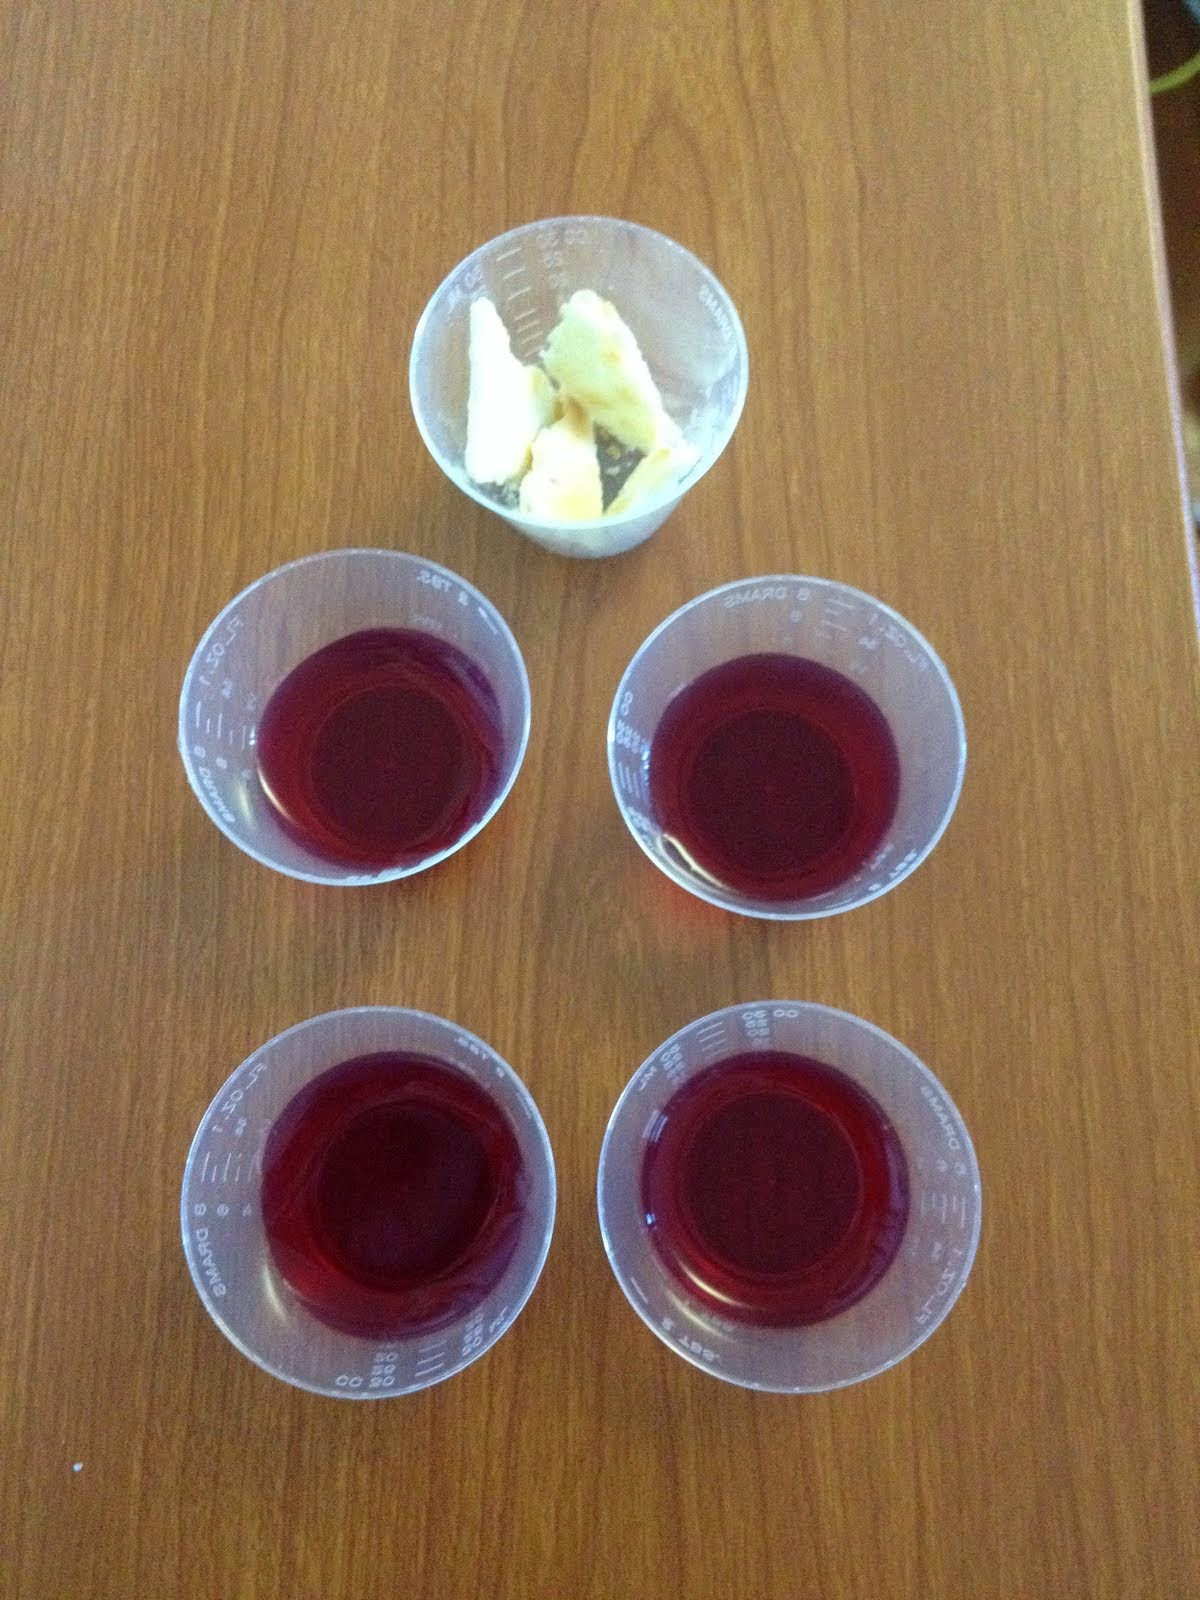 Communion in medicine cups. Fitting on so many levels.